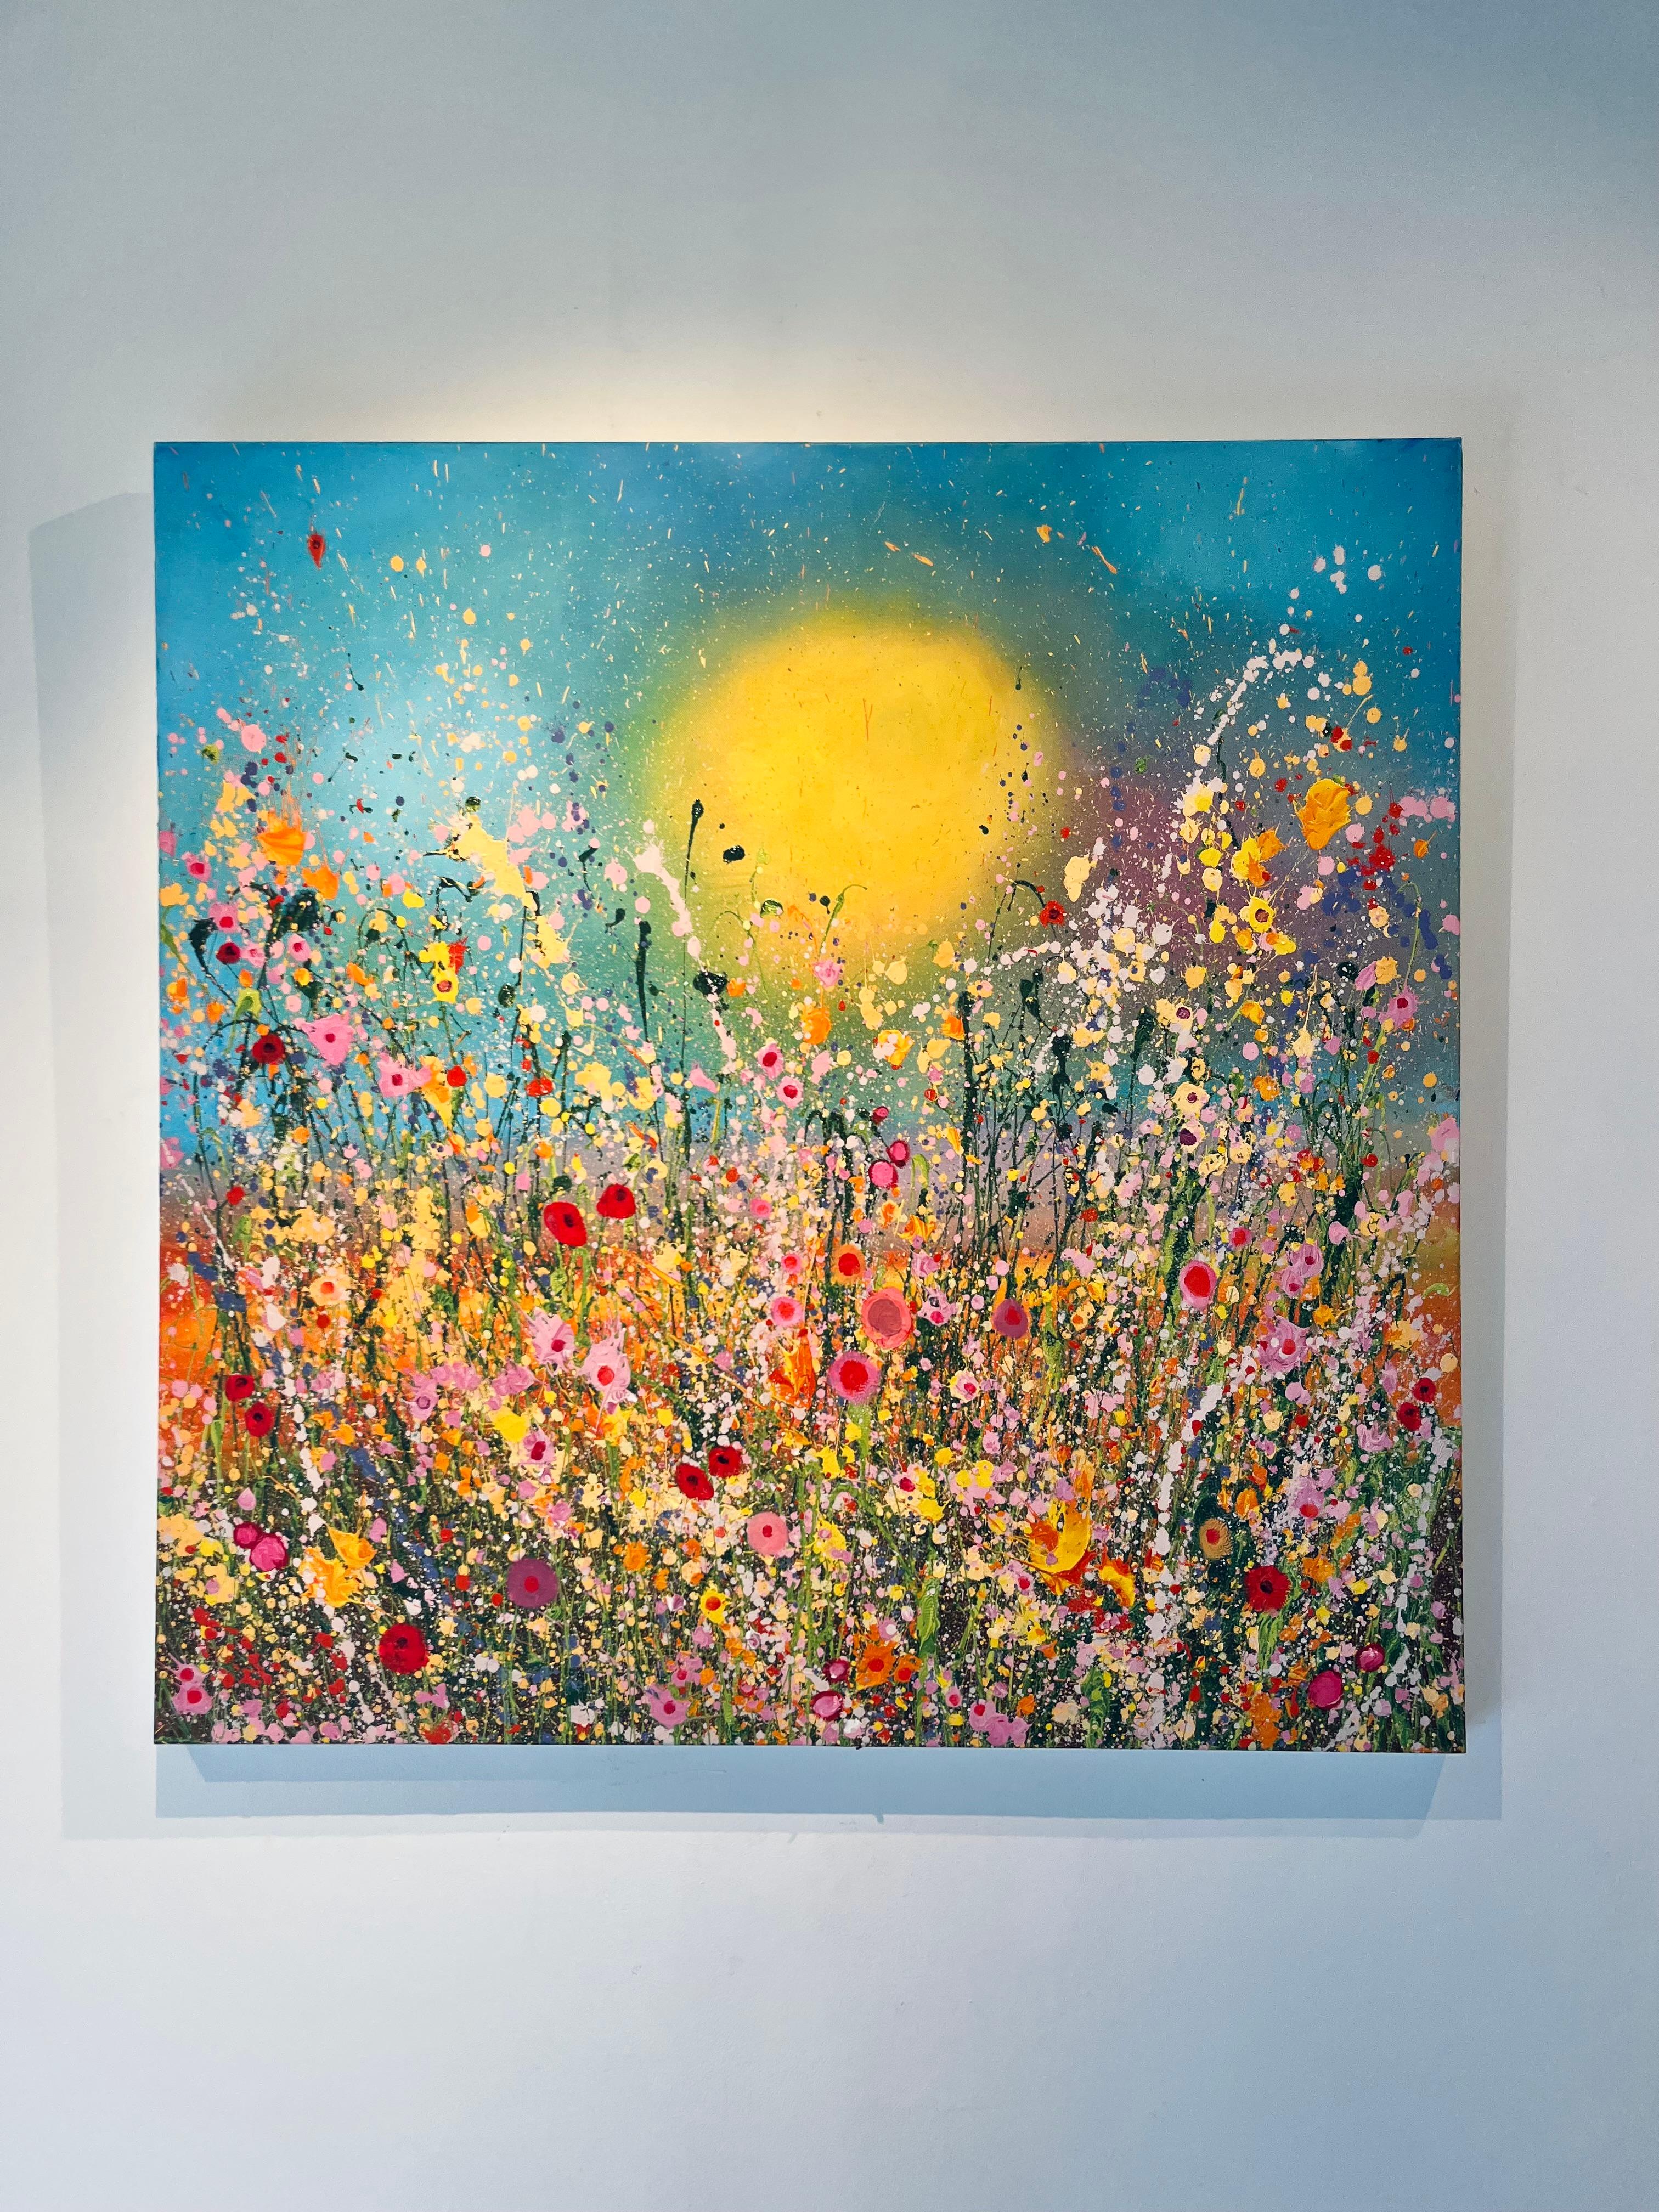  I Love You Forever- original abstract floral oil painting-contemporary artwork - Painting by Yvonne Coomber